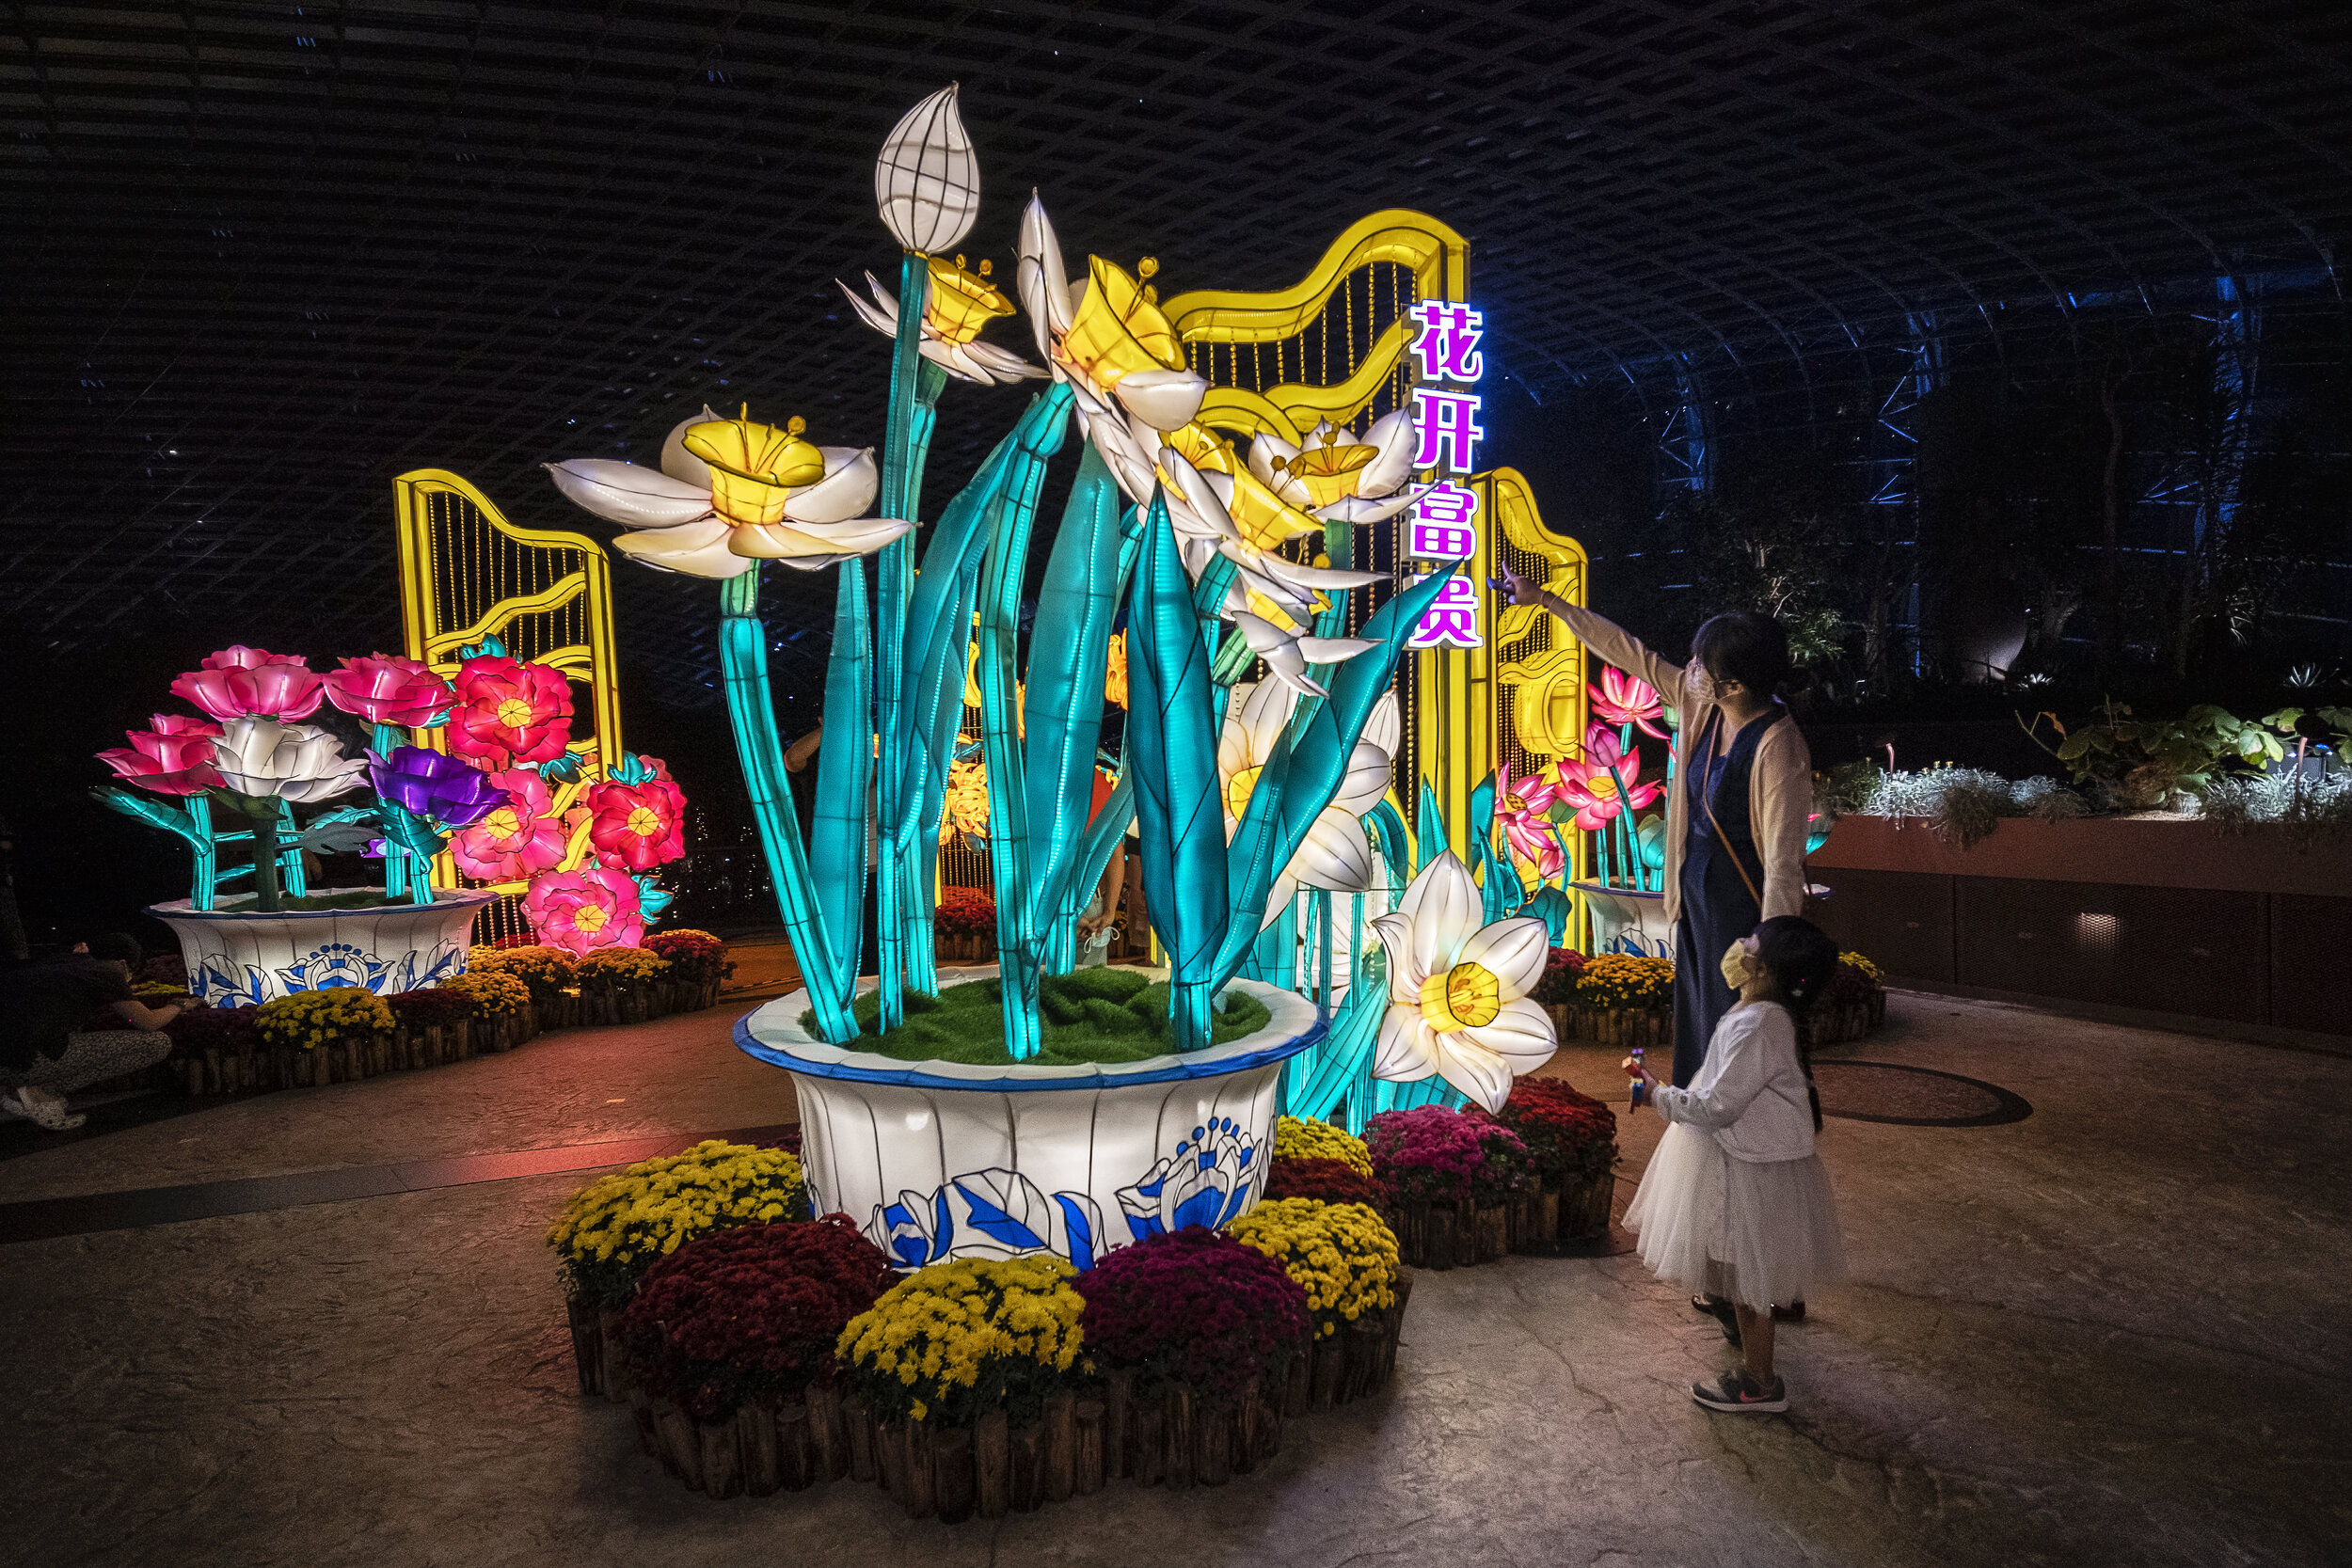  Visitors wearing face masks look at light sculptures of flowers during the annual Dahlia Dreams floral display ahead of the Chinese Lunar New Year of the Ox, otherwise known as the Spring Festival, at Singapore's Gardens by the Bay, January 31, 2021